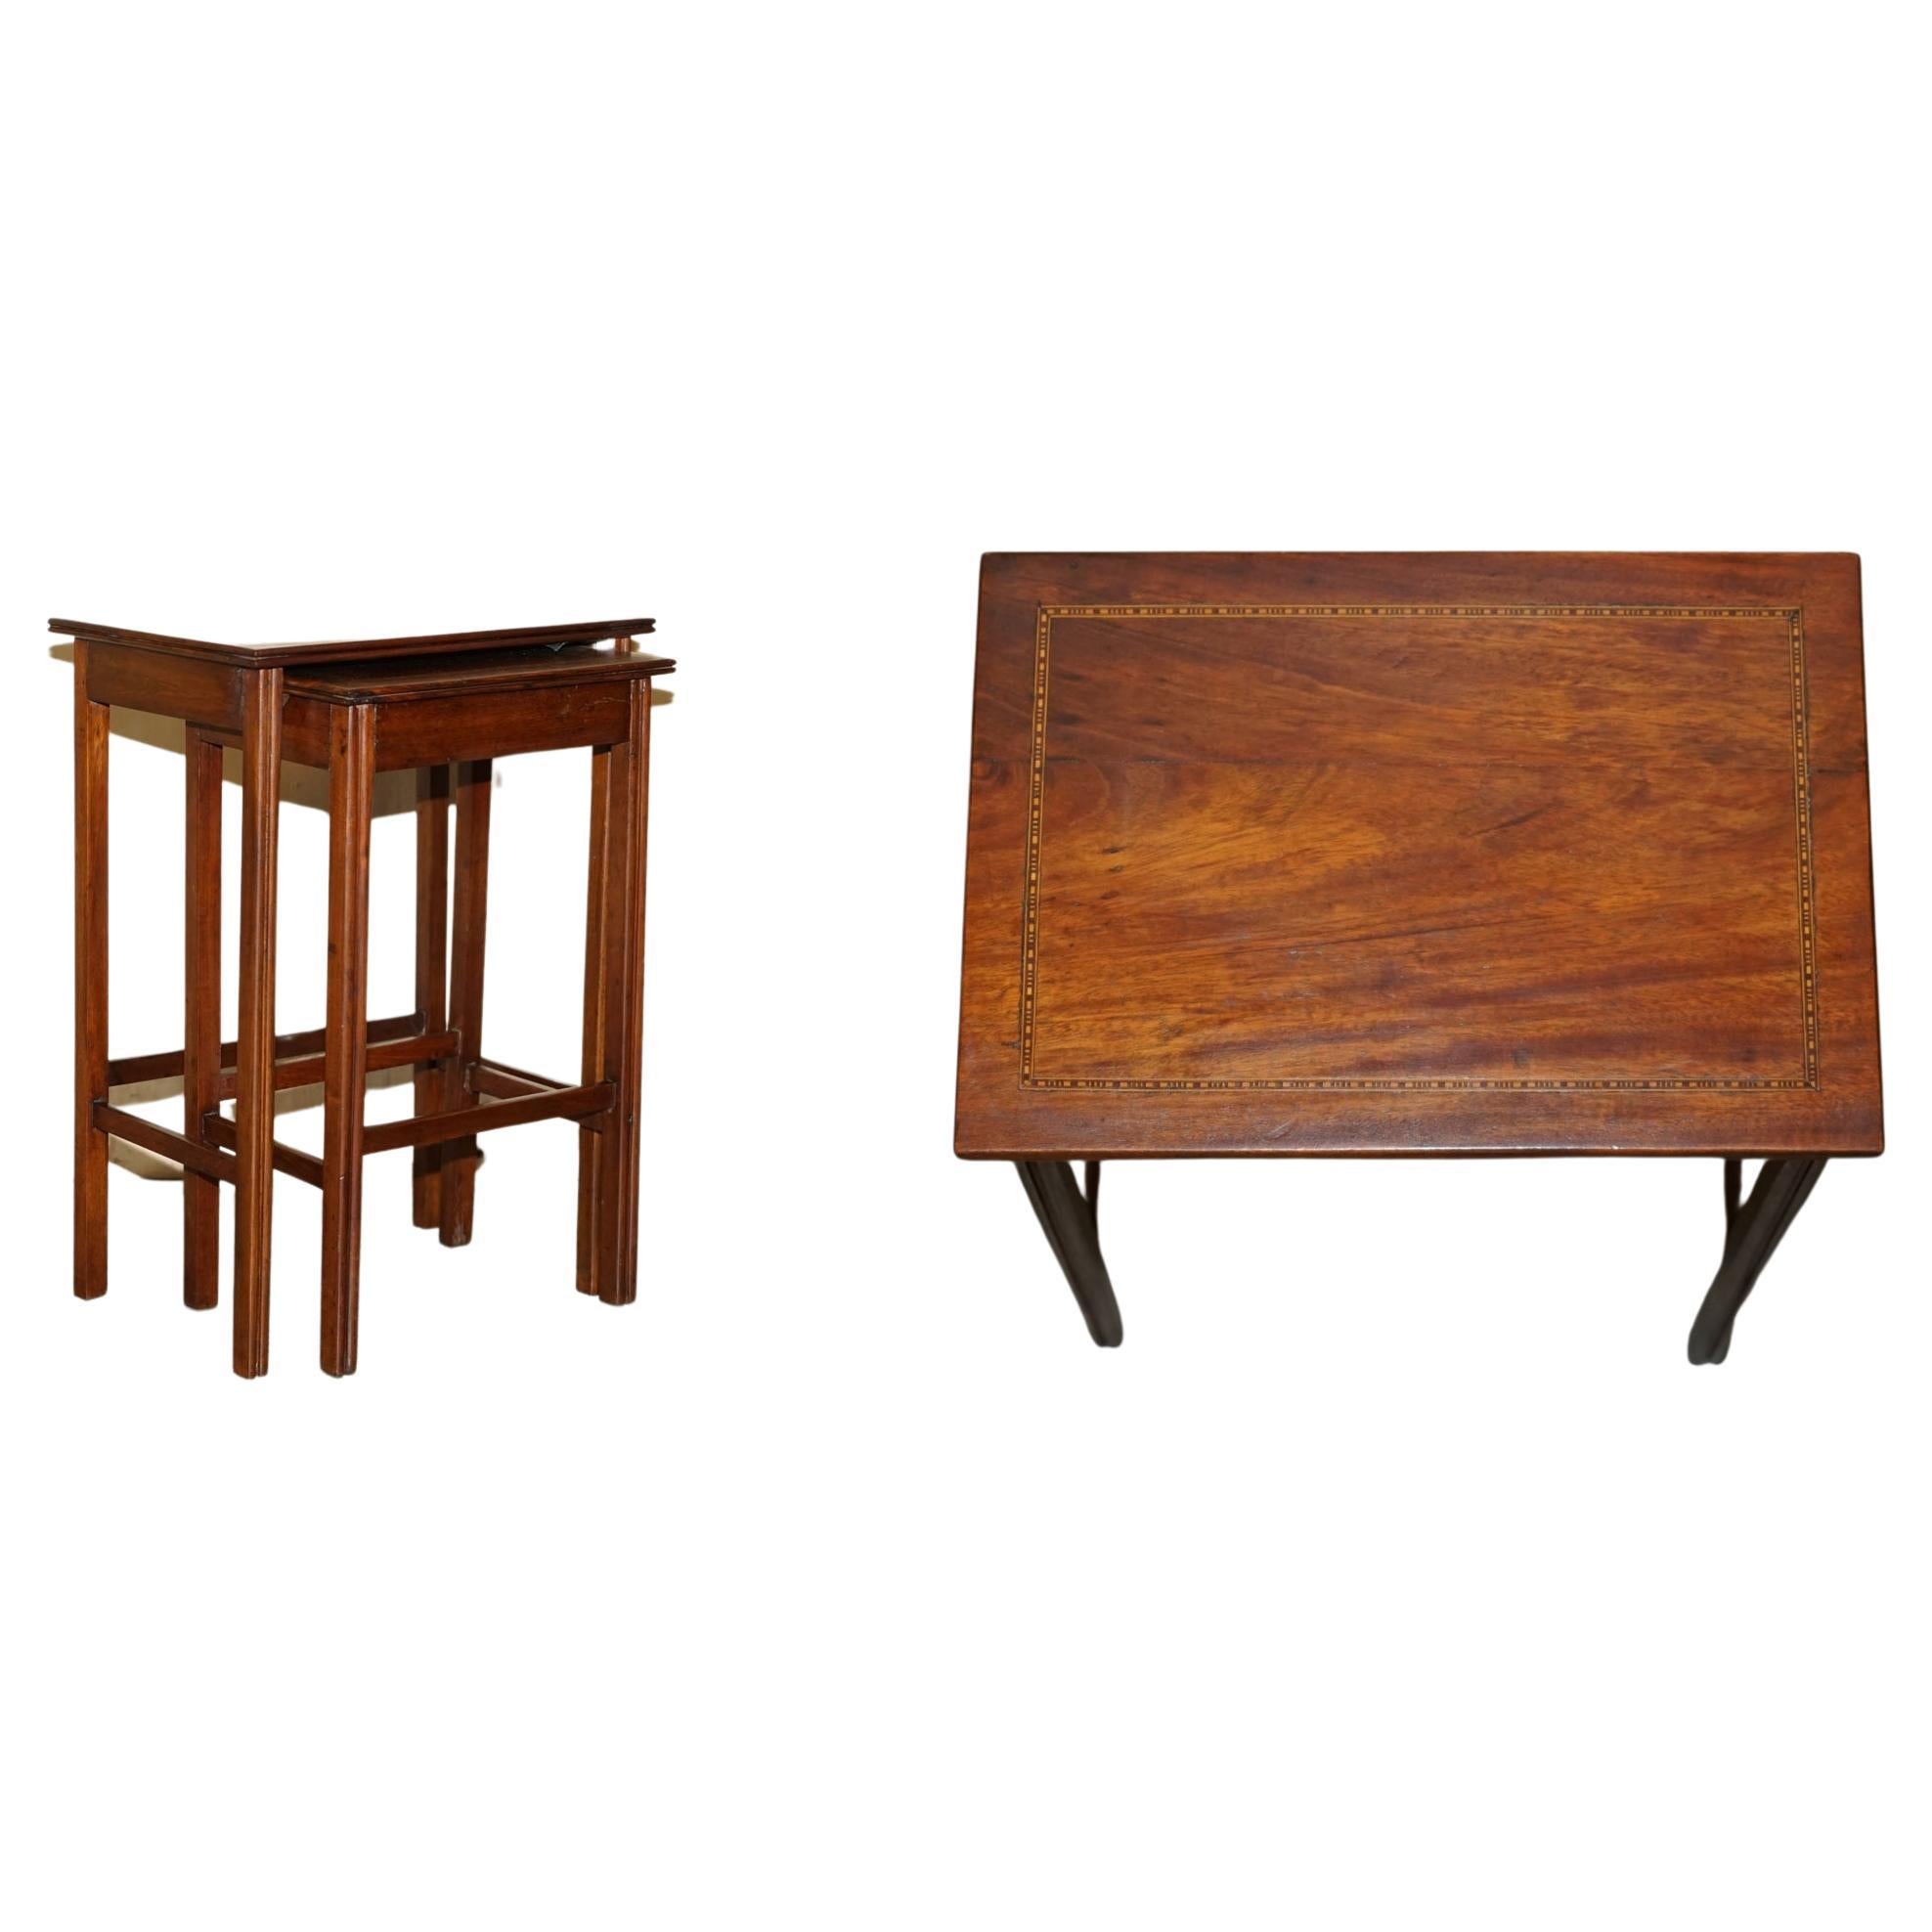 Vintage Nest of Two Flamed Hardwood Tables with Lovely Boxwood Inlaid Boarder's